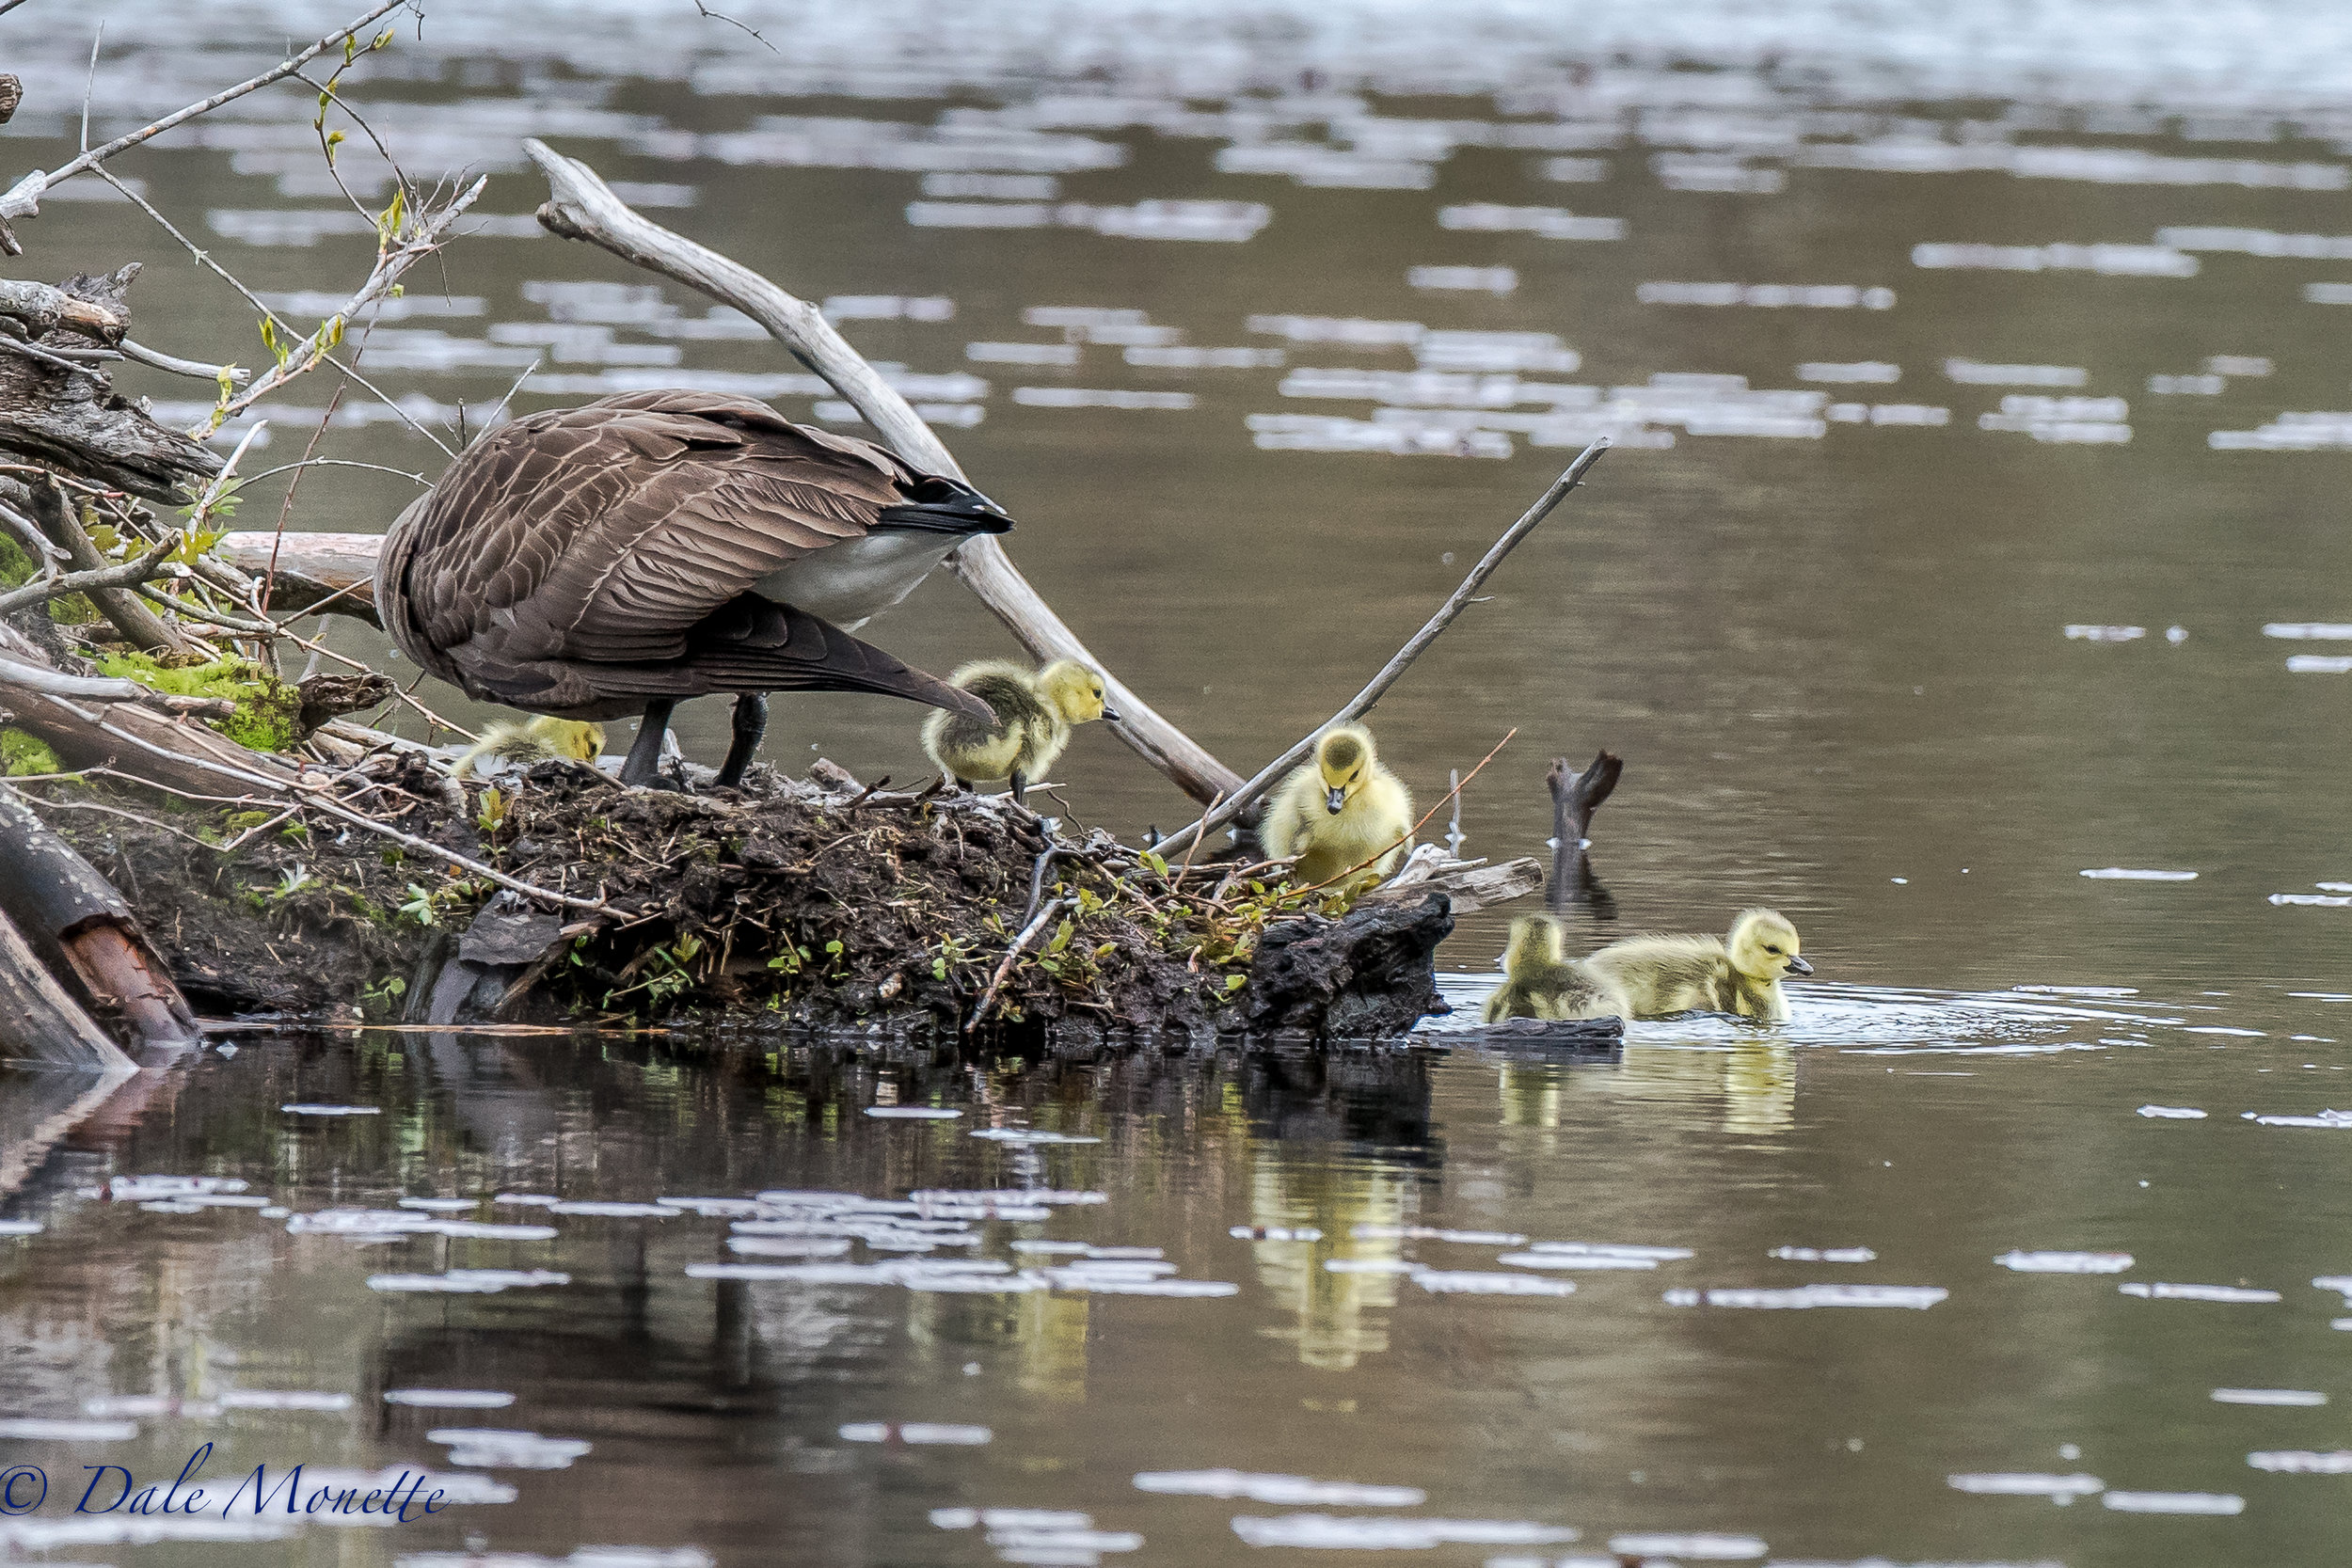   Ive been watching these geese for over a 2 months. &nbsp;They made a nest on a beaver lodge a little over three months ago and this morning they had 5 chicks ! &nbsp;She was sitting on eggs yesterday so these birds have their first day on the water